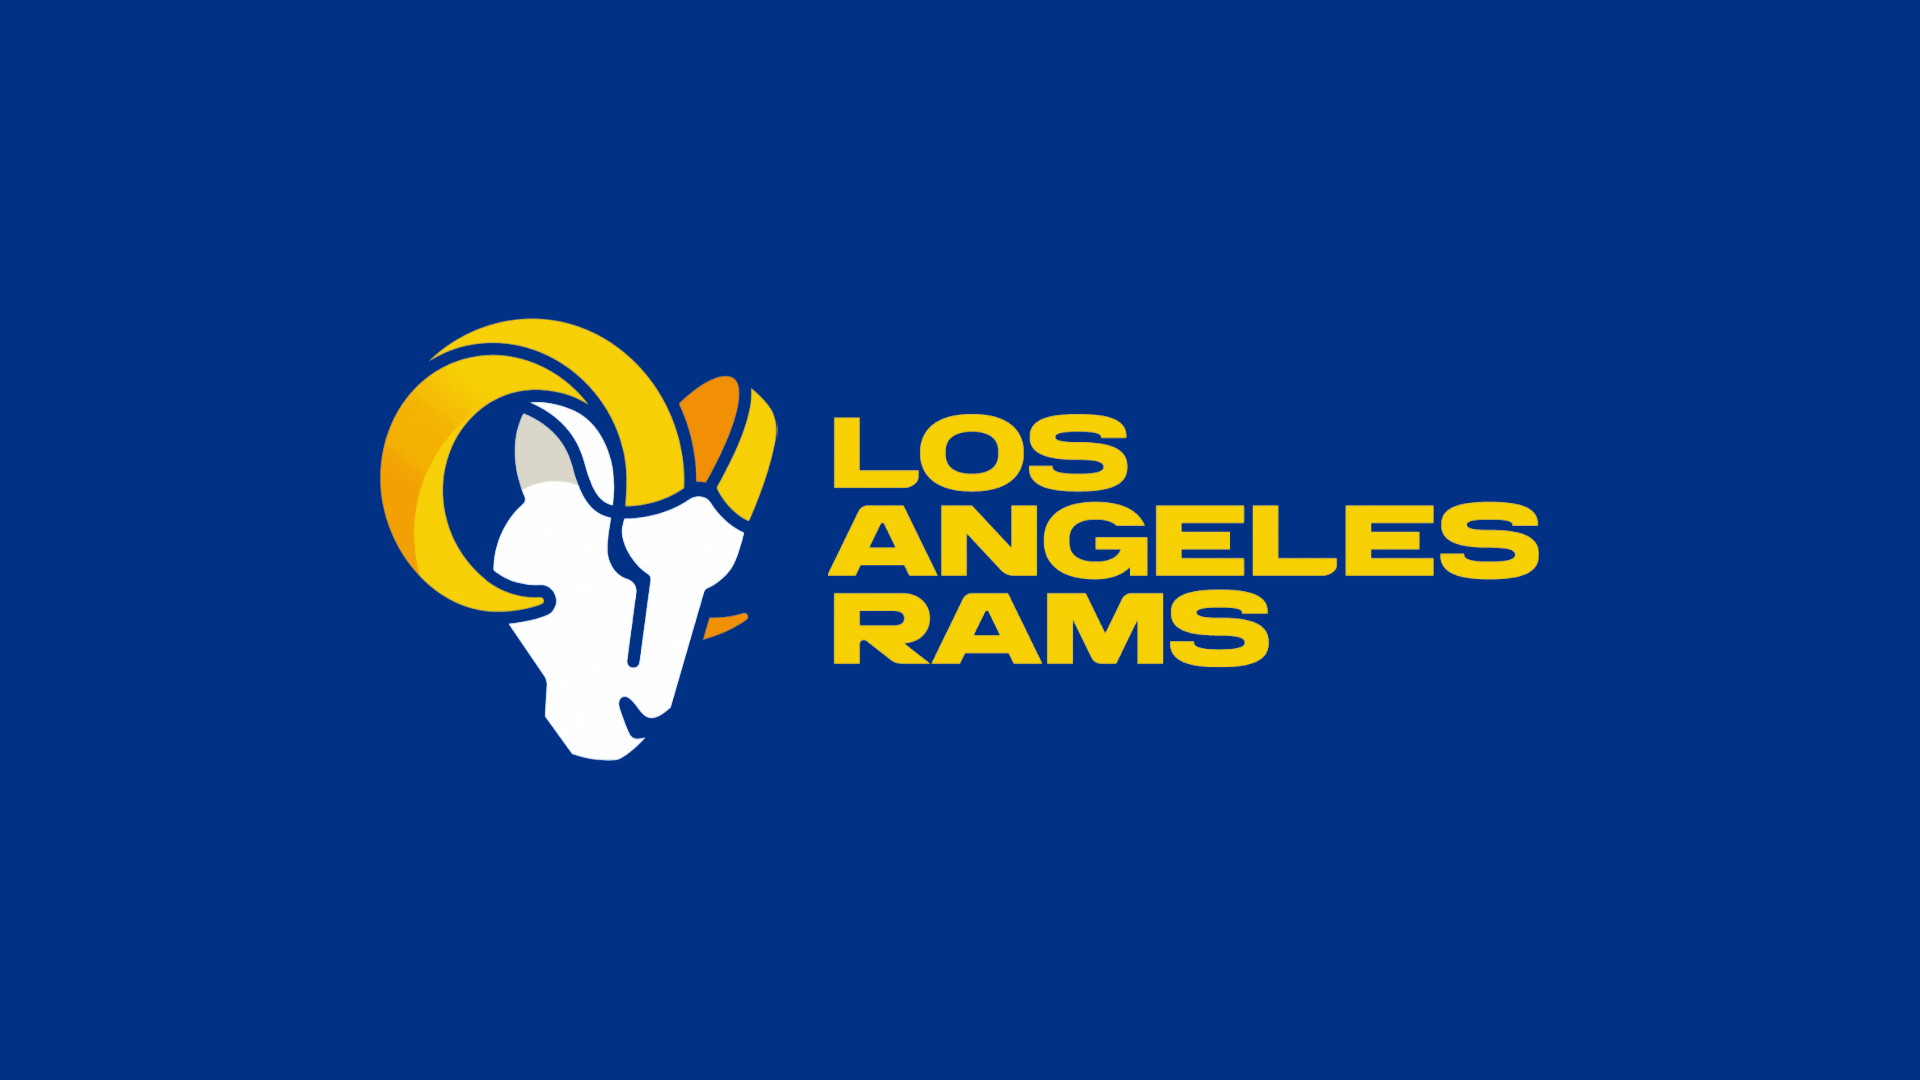 Los Angeles Rams Wallpaper HD Laptop with high-resolution 1920x1080 pixel. You can use and set as wallpaper for Notebook Screensavers, Mac Wallpapers, Mobile Home Screen, iPhone or Android Phones Lock Screen